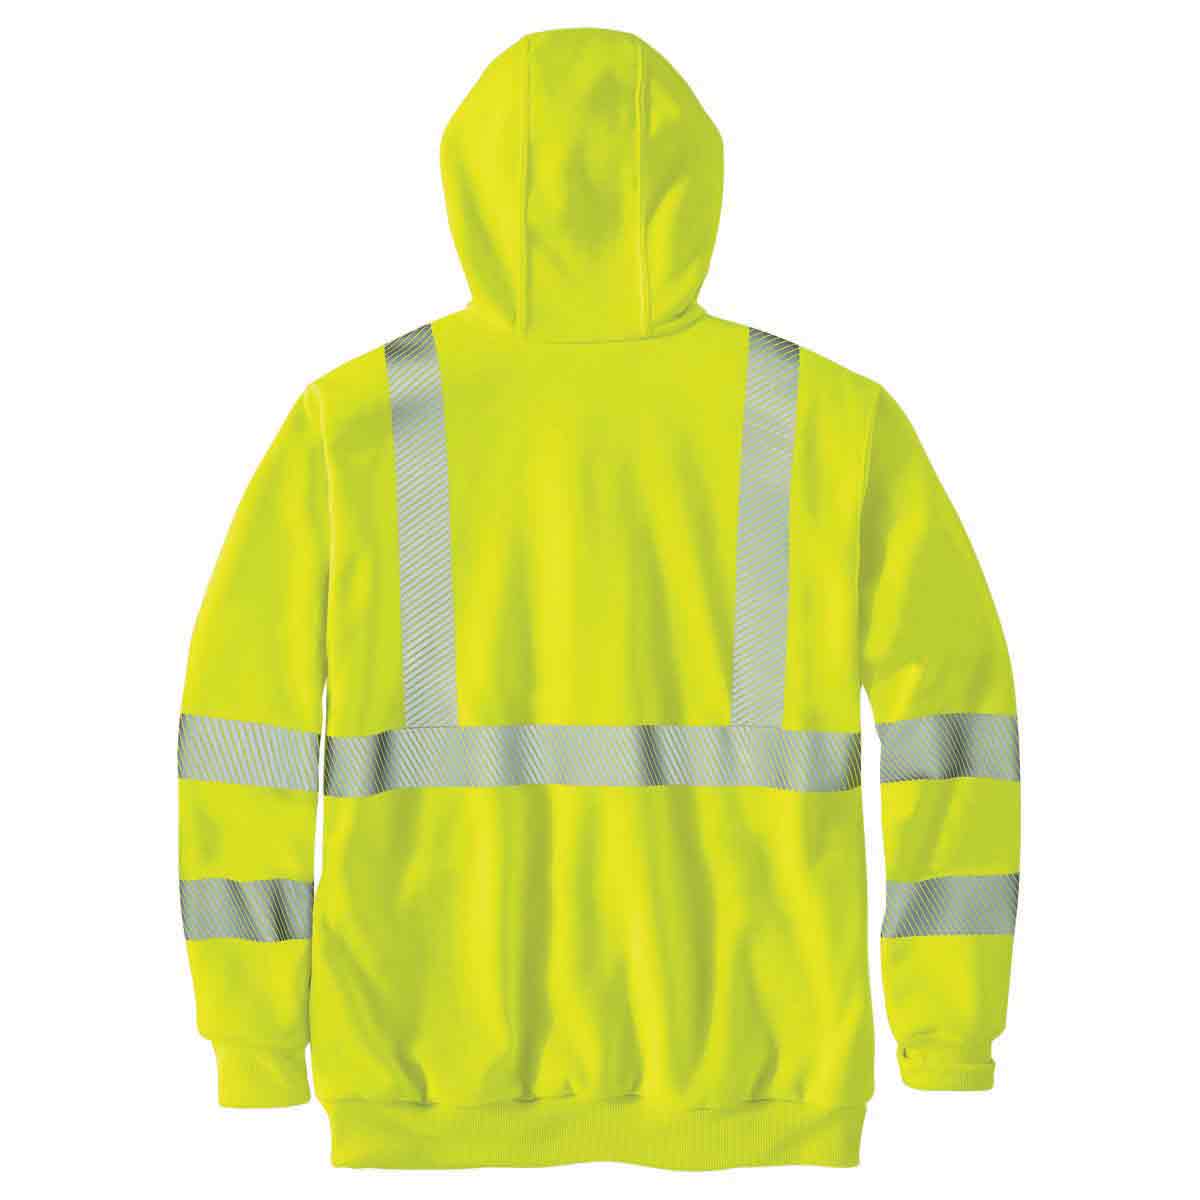 Carhartt Men's High Visibility Rain Defender Loose Fit Midweight Thermal Lined Full Zip Class 3 Sweatshirt